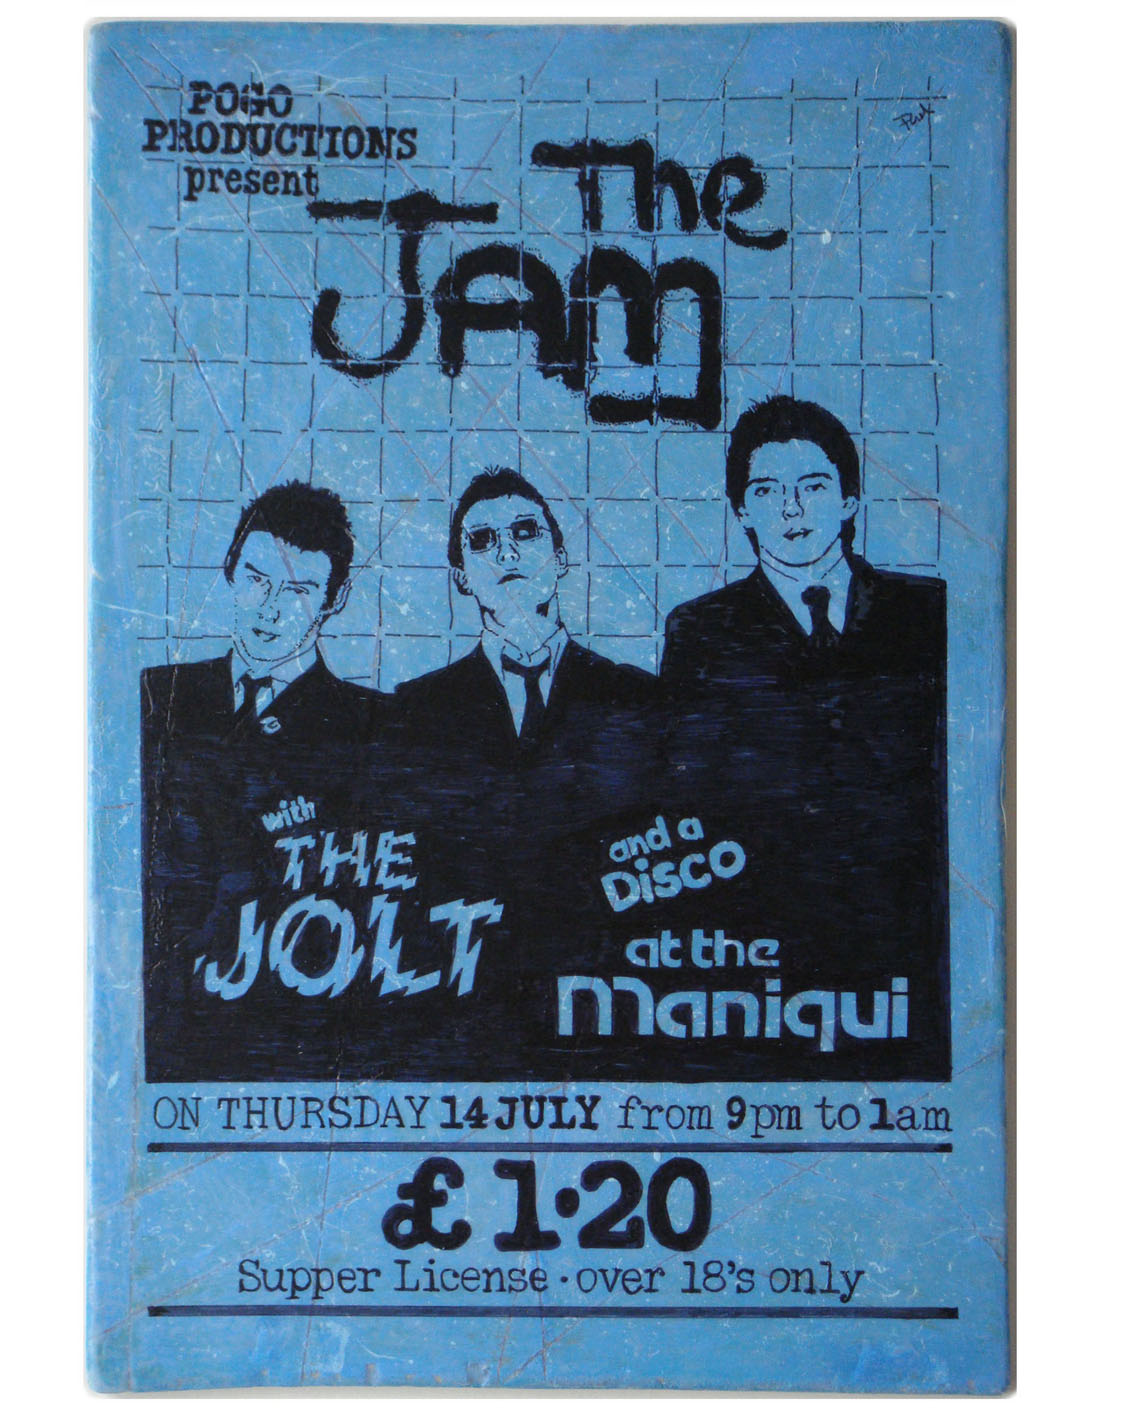 The Jam<br>Falkirk Maniqui<br>Mixed media on plywood<br>28 x 42cm